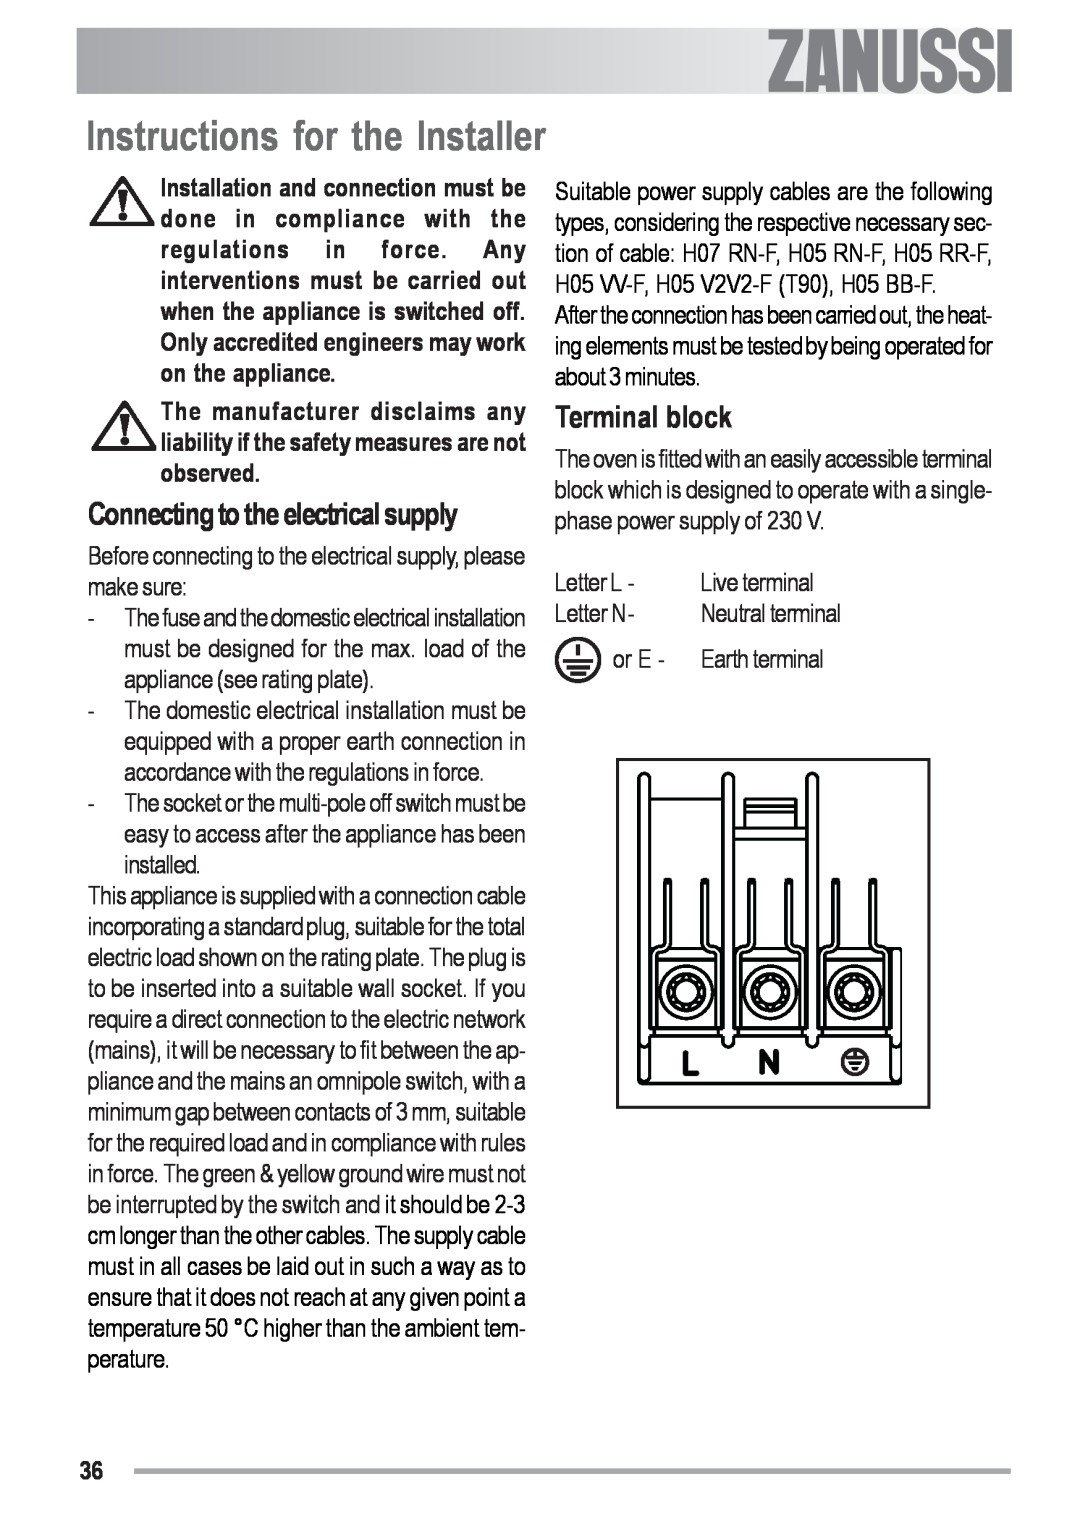 Zanussi ZYB 591 XL, ZYB 590 XL manual Instructions for the Installer, Terminal block, Connecting to the electrical supply 